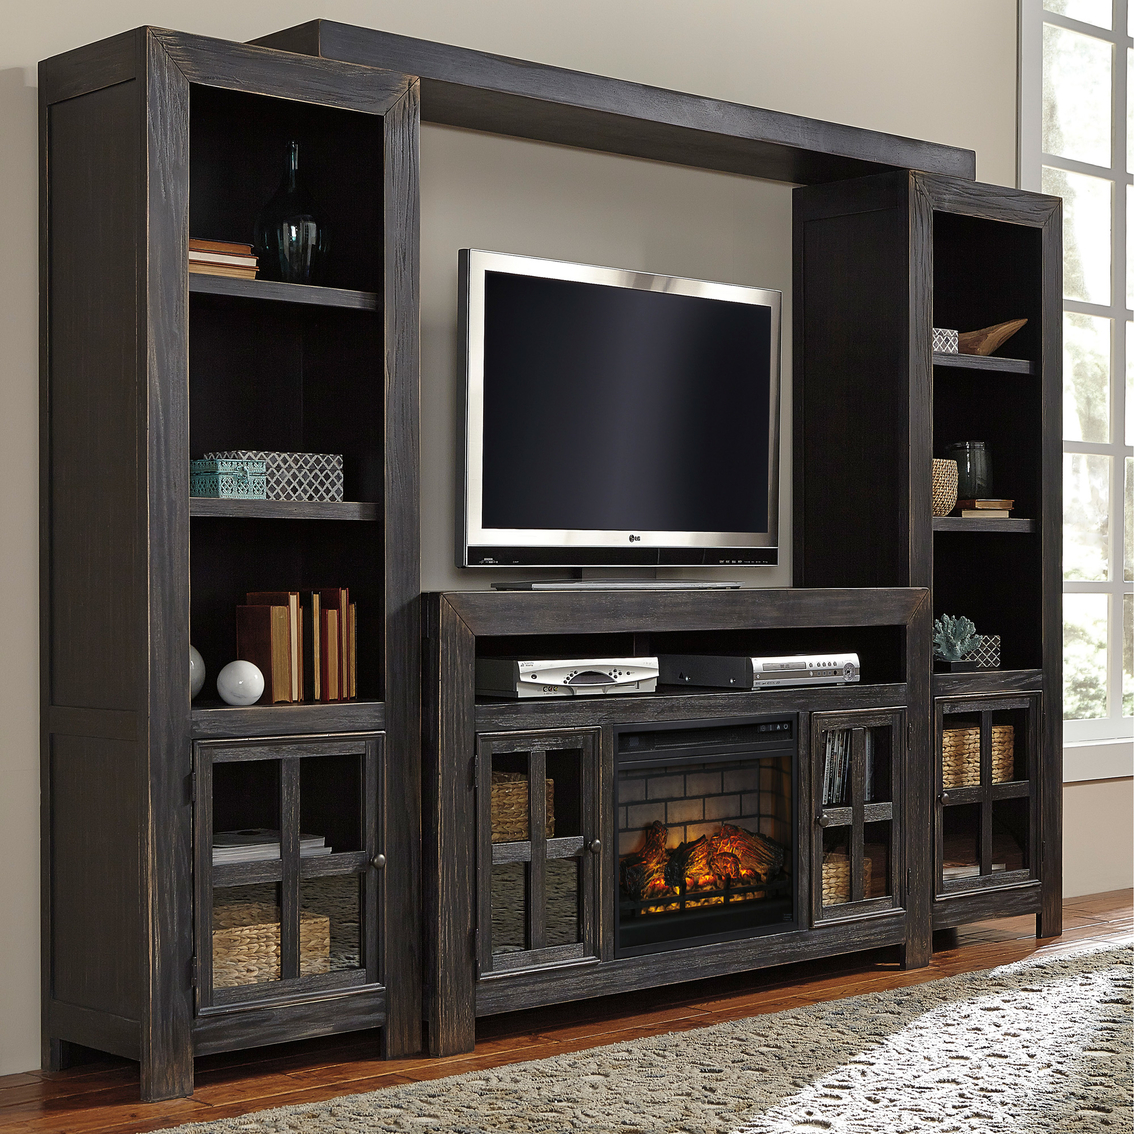 Ashley Gavelston Entertainment Wall with Fireplace Insert - Image 2 of 2